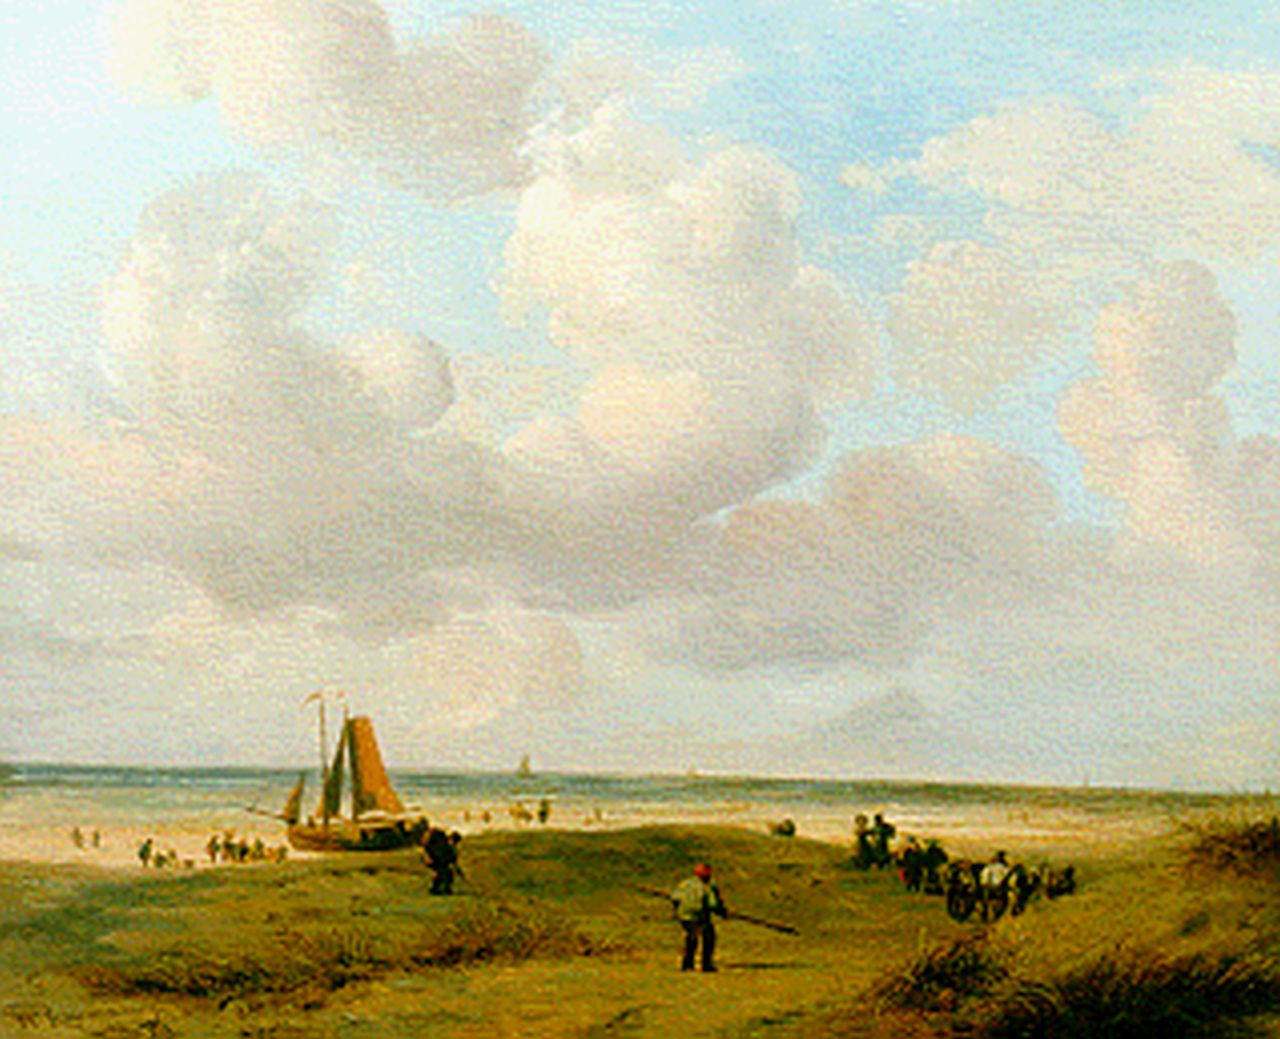 Ravenswaay J. van | Jan van Ravenswaay, Fisher folk on the beach, oil on panel 25.7 x 31.7 cm, signed l.l. and dated 1827